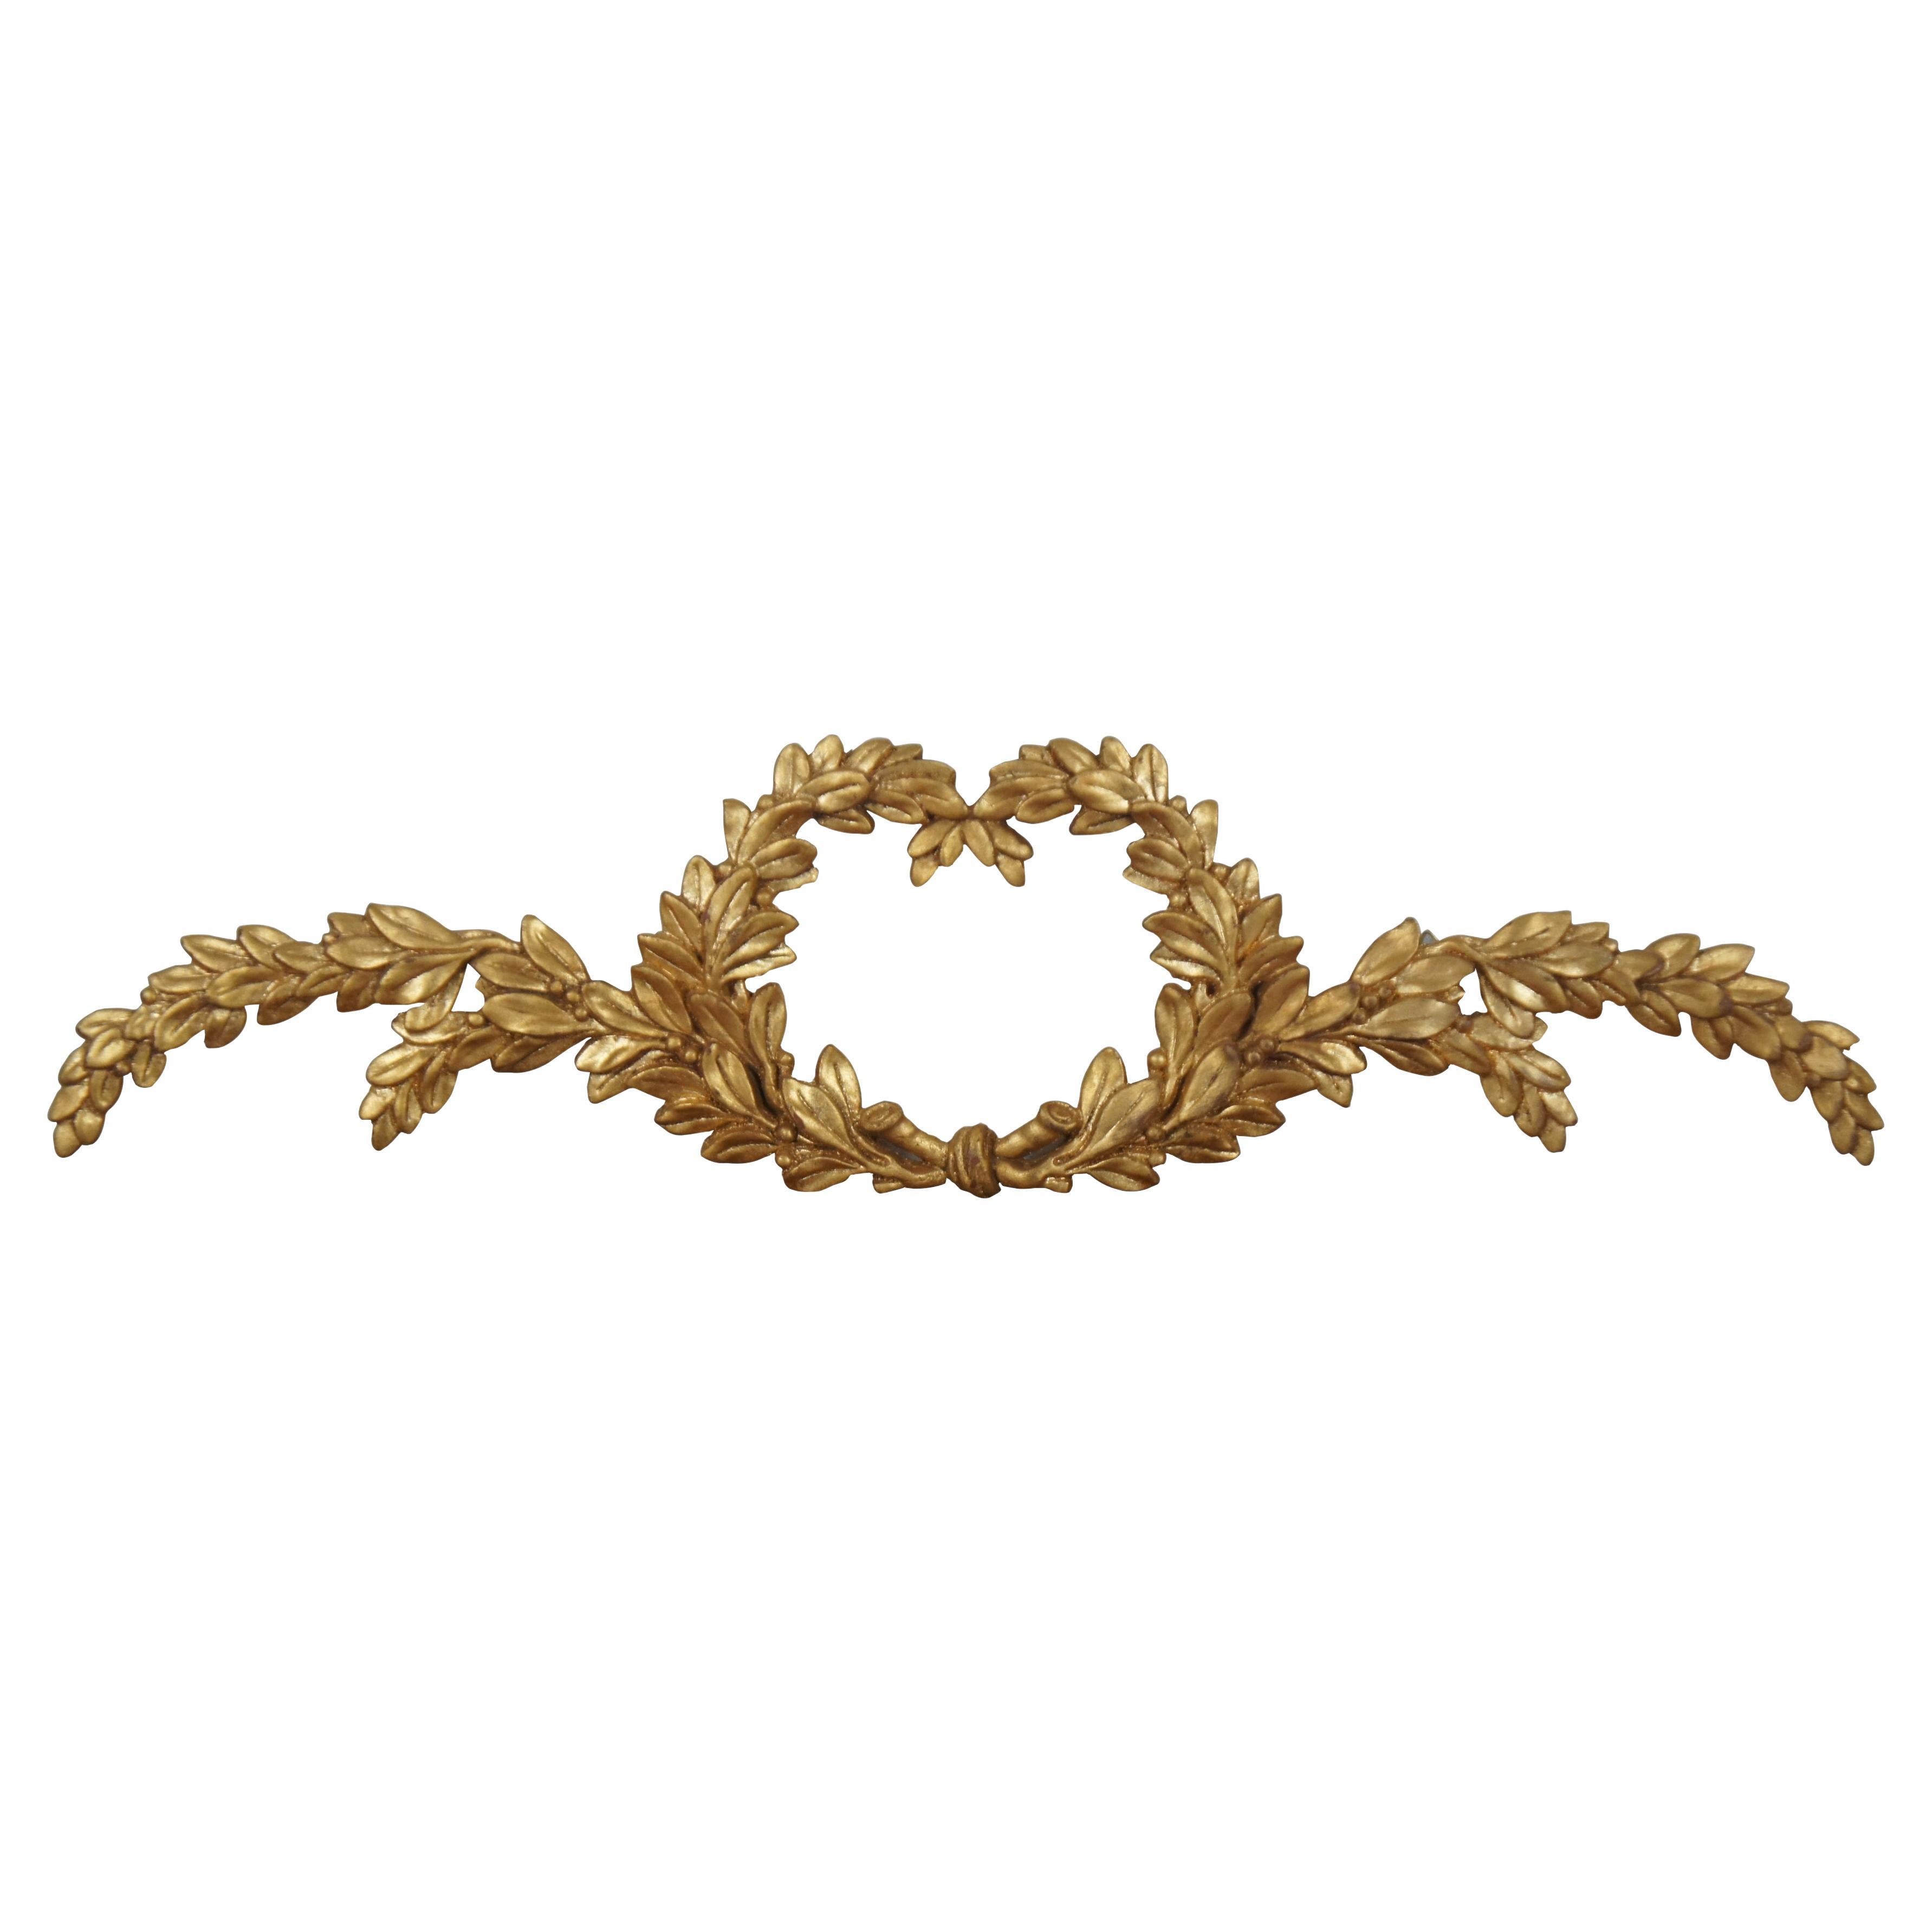 French Neoclassical Gold Giltwood Laurel Wreath Garland Pediment Wall Plaque